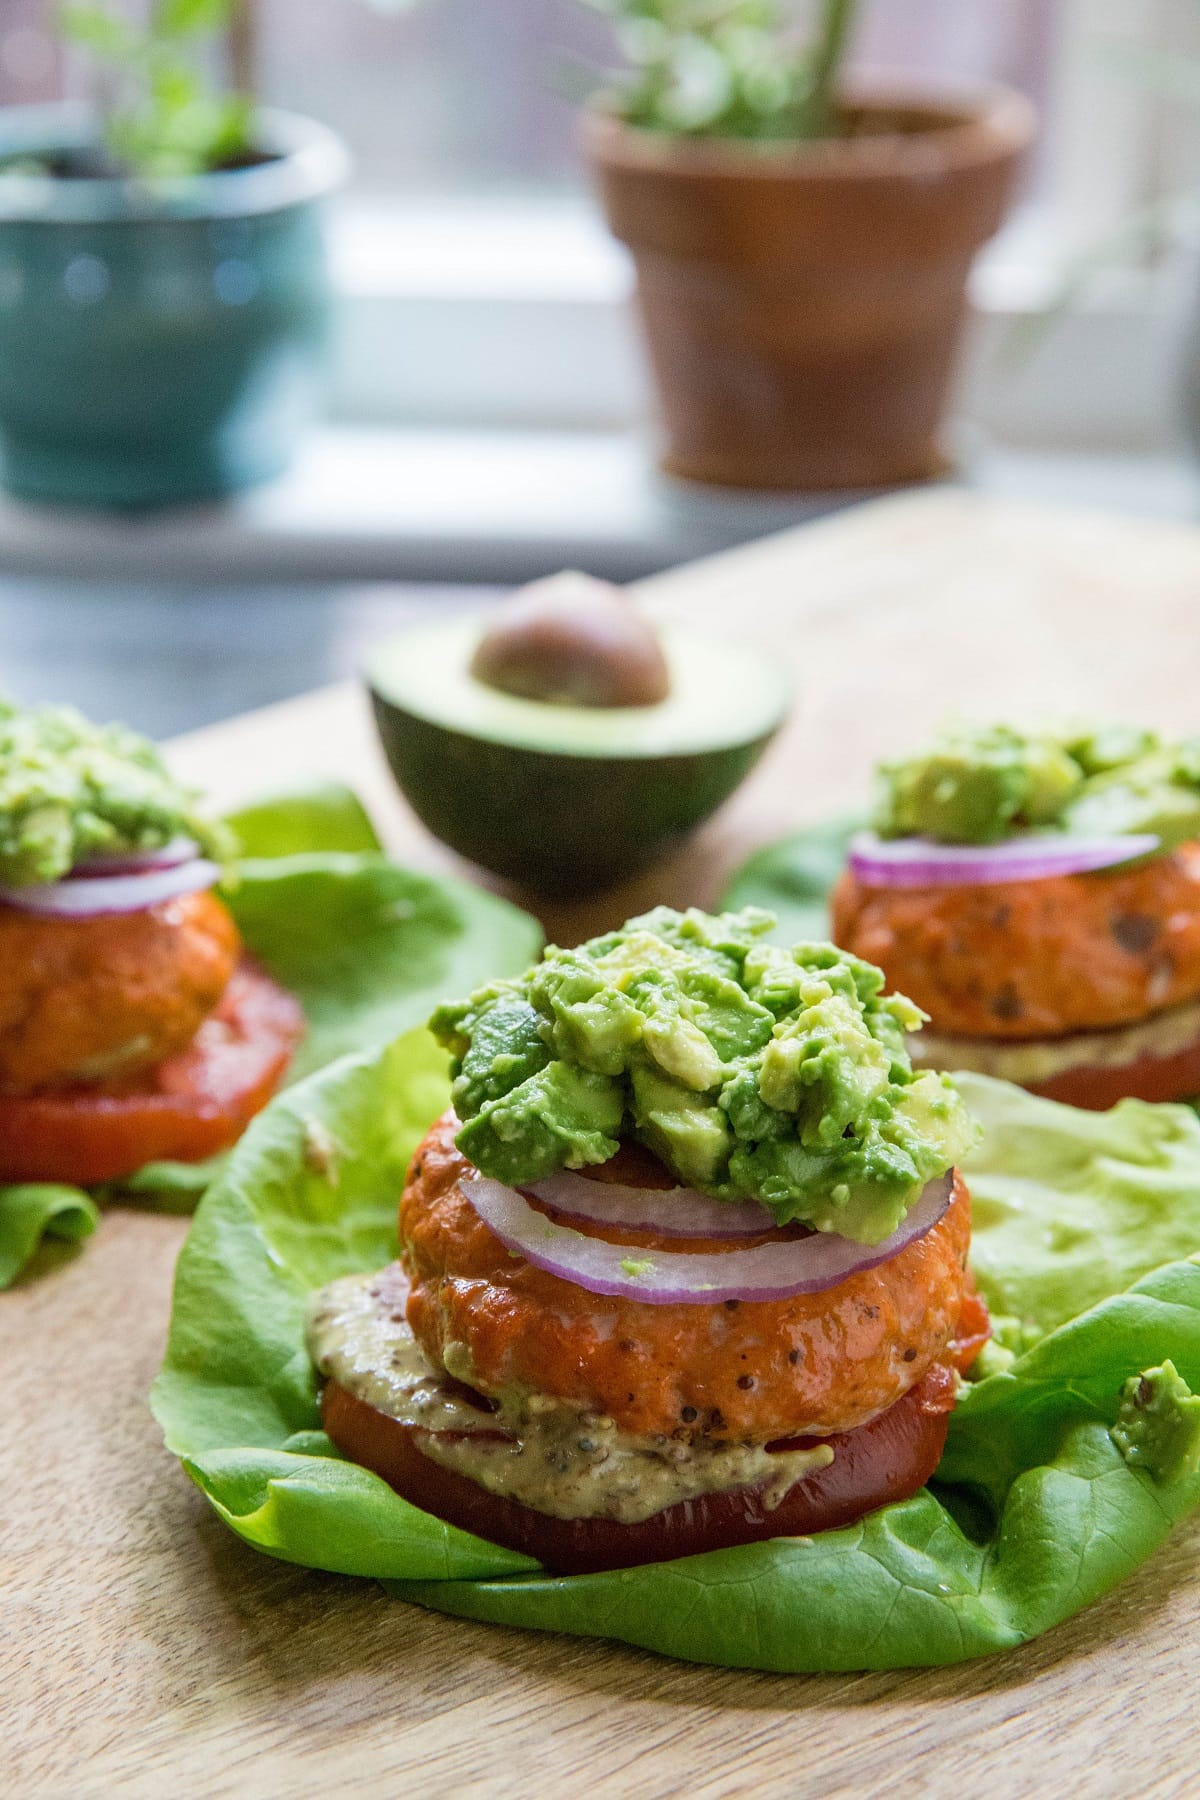 Easy Baked Salmon Burgers - gluten-free, low-carb, paleo, whole30, keto, delicious | TheRoastedRoot.net